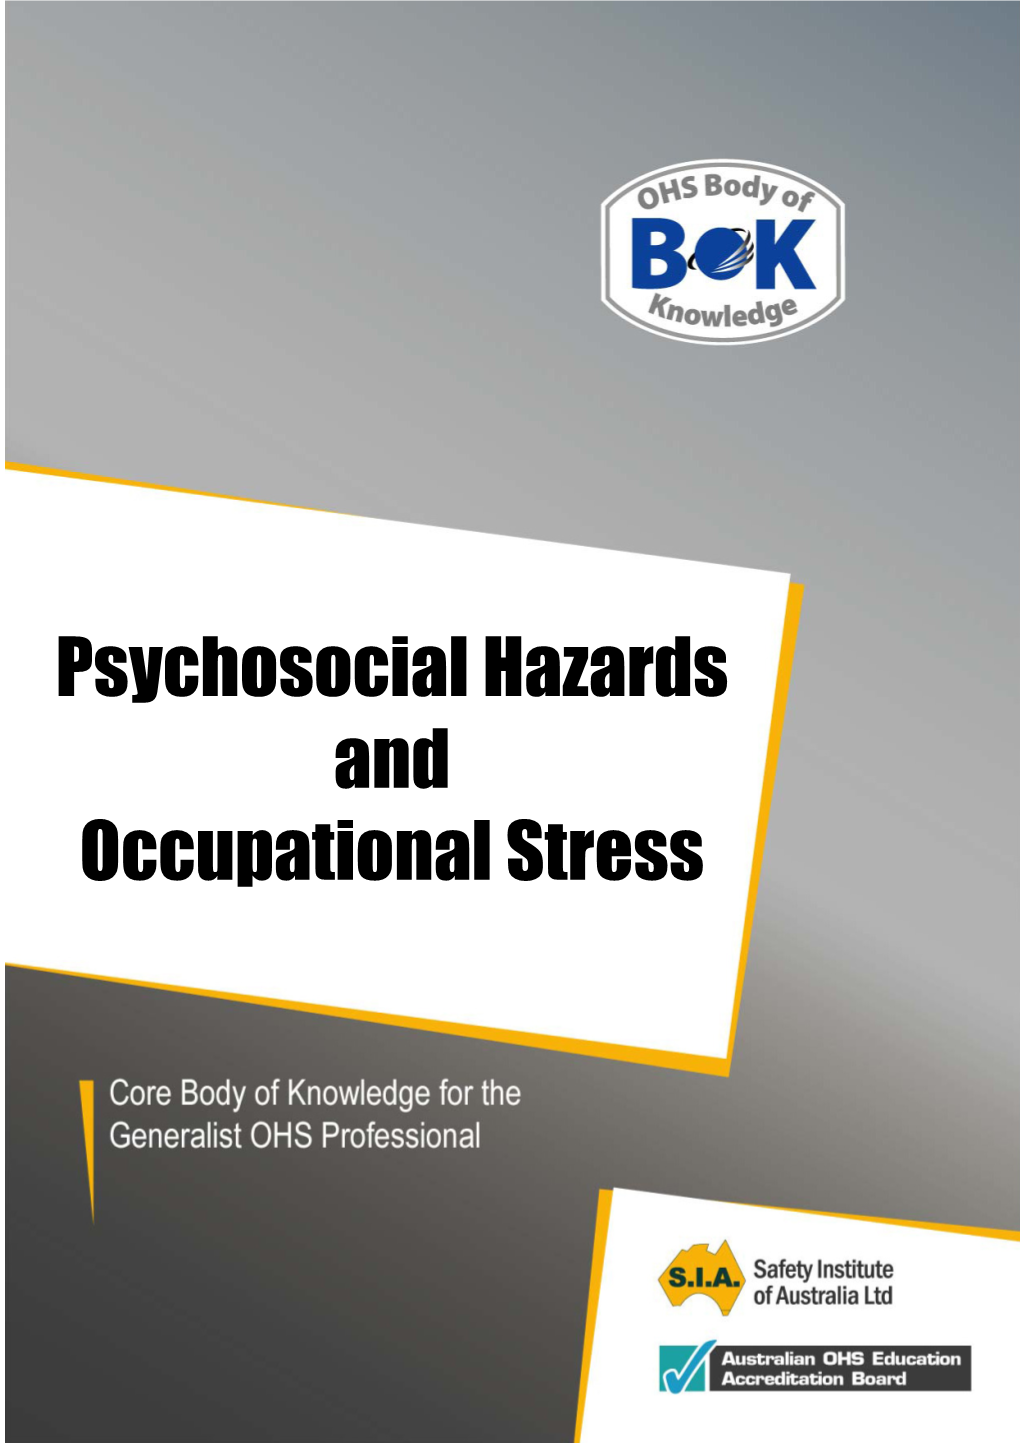 Psychosocial Hazards and Occupational Stress